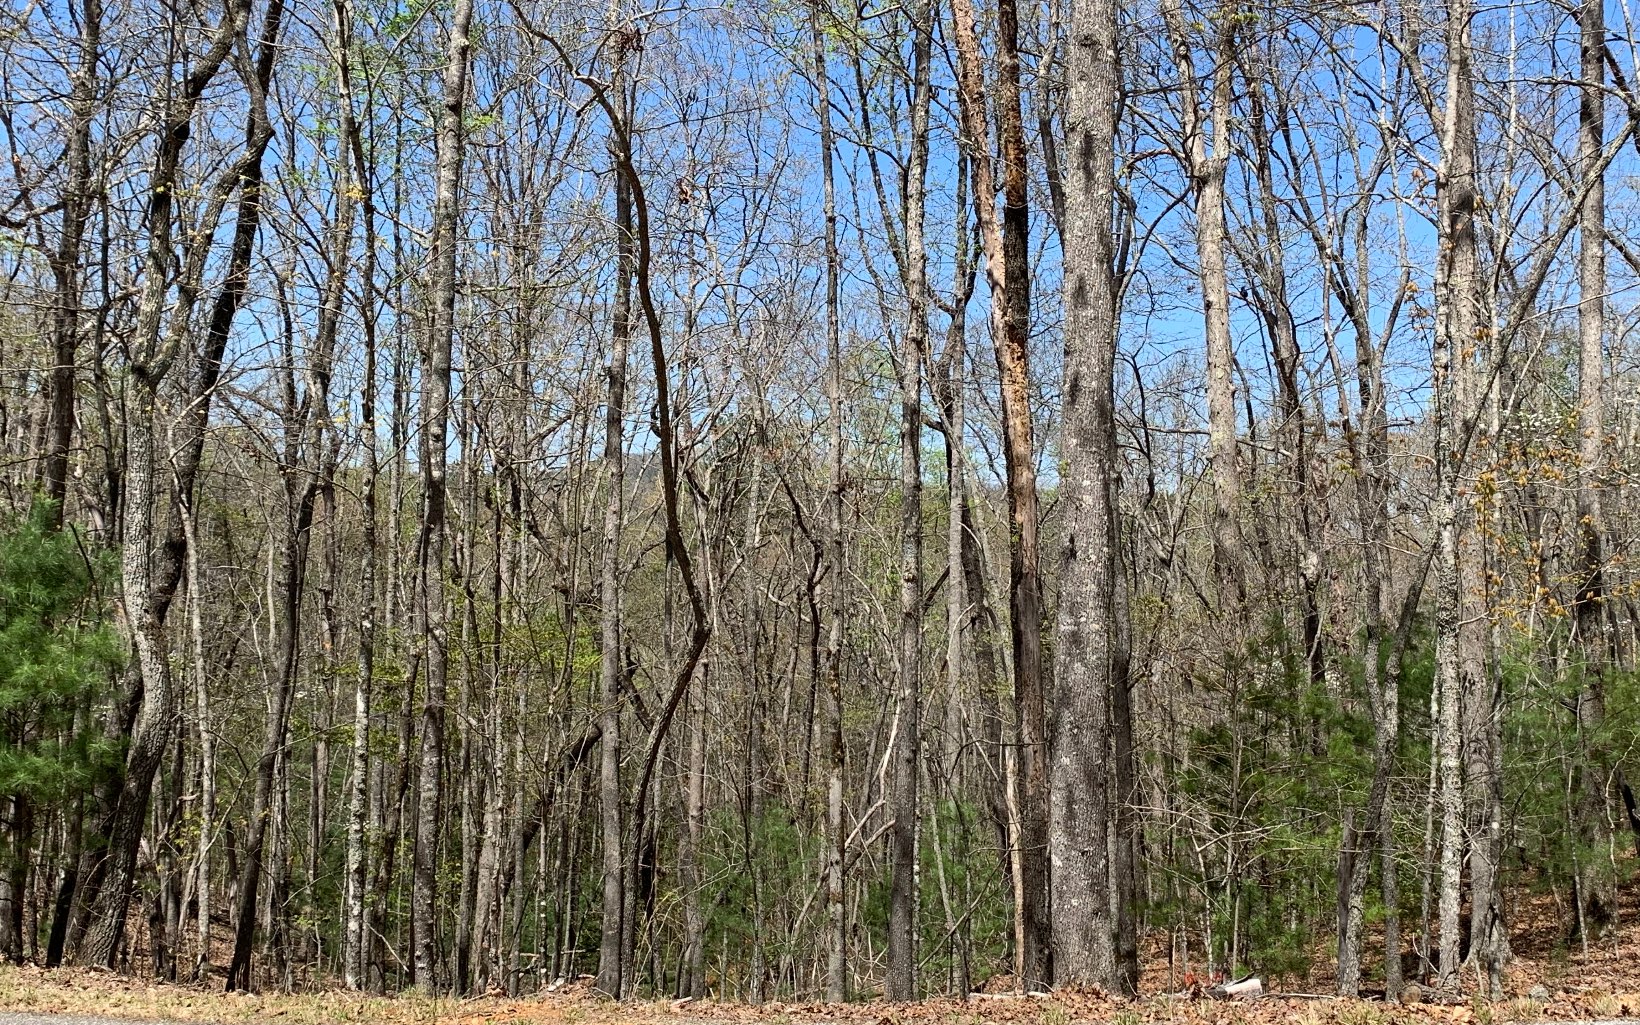 Lovely acreage with hardwood trees, seasonal long range mountain views and minimal restrictions. This well priced lot is located in the established Highlands Subdivision between Blairsville and Blue Ridge and close to Lake Nottely if you want to enjoy the lake.